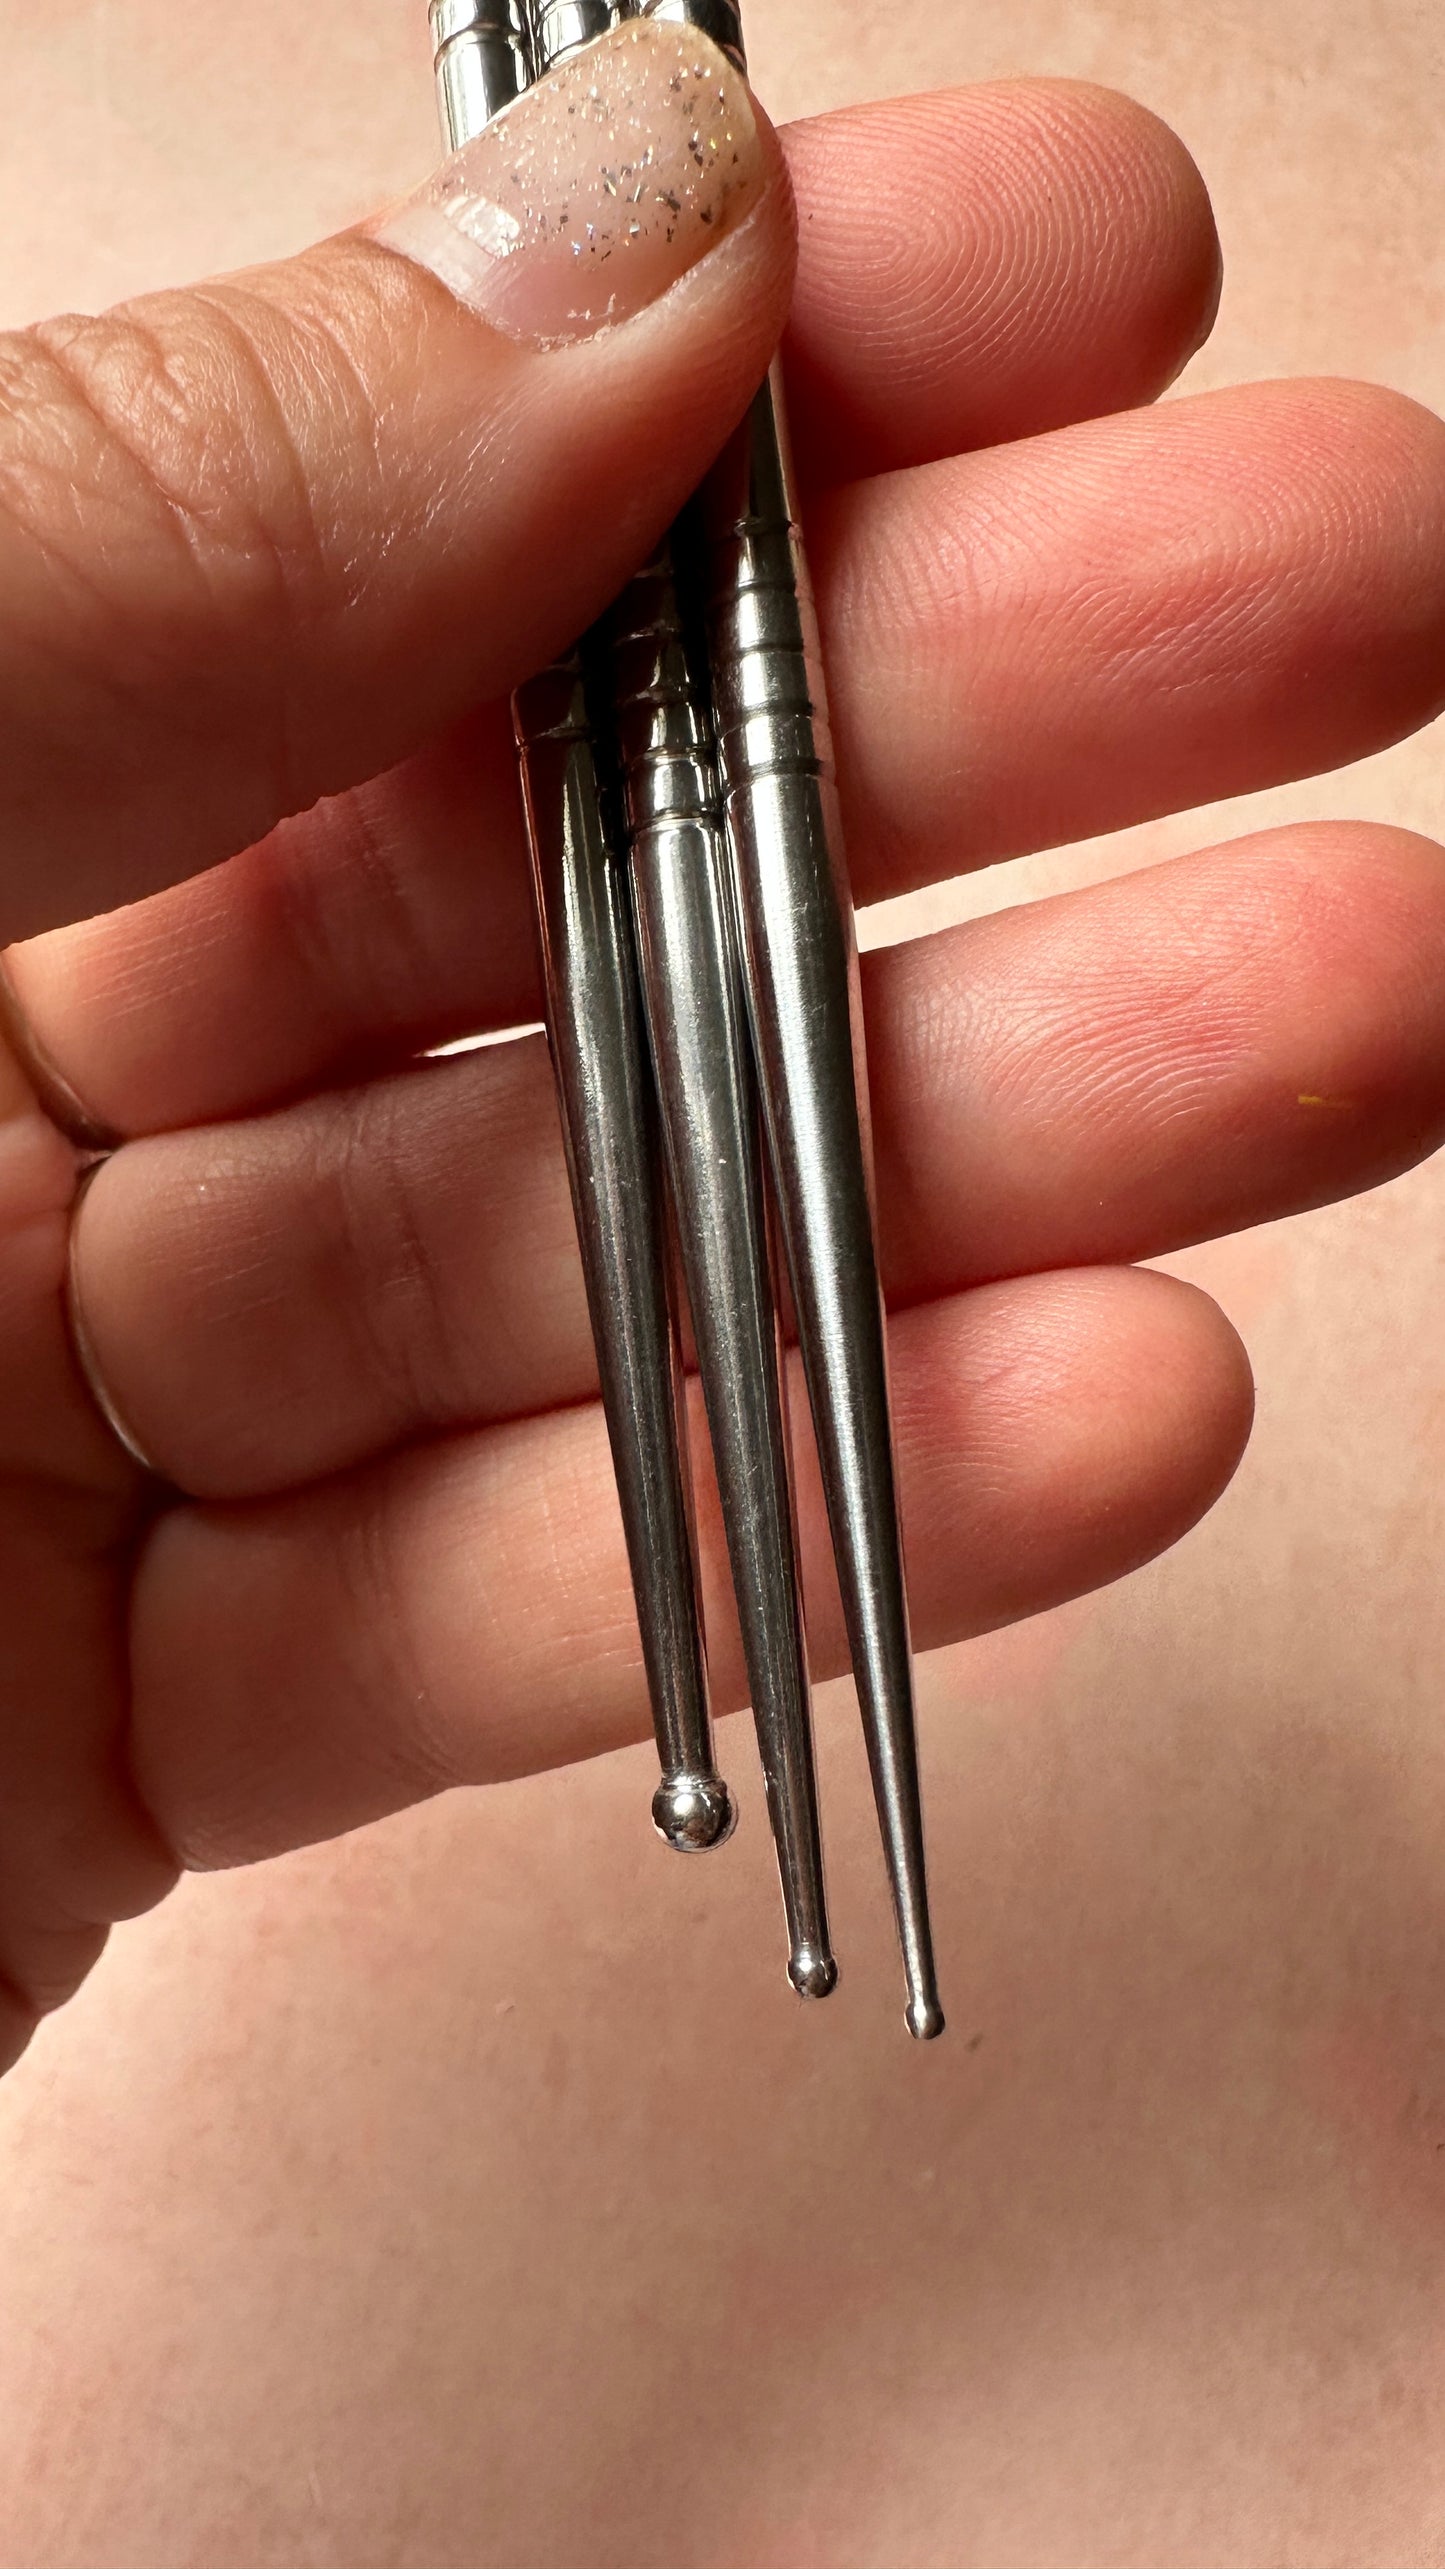 Small Stainless Steel Ball Stylus set | ball tips for decorating clay | hammered metal tool